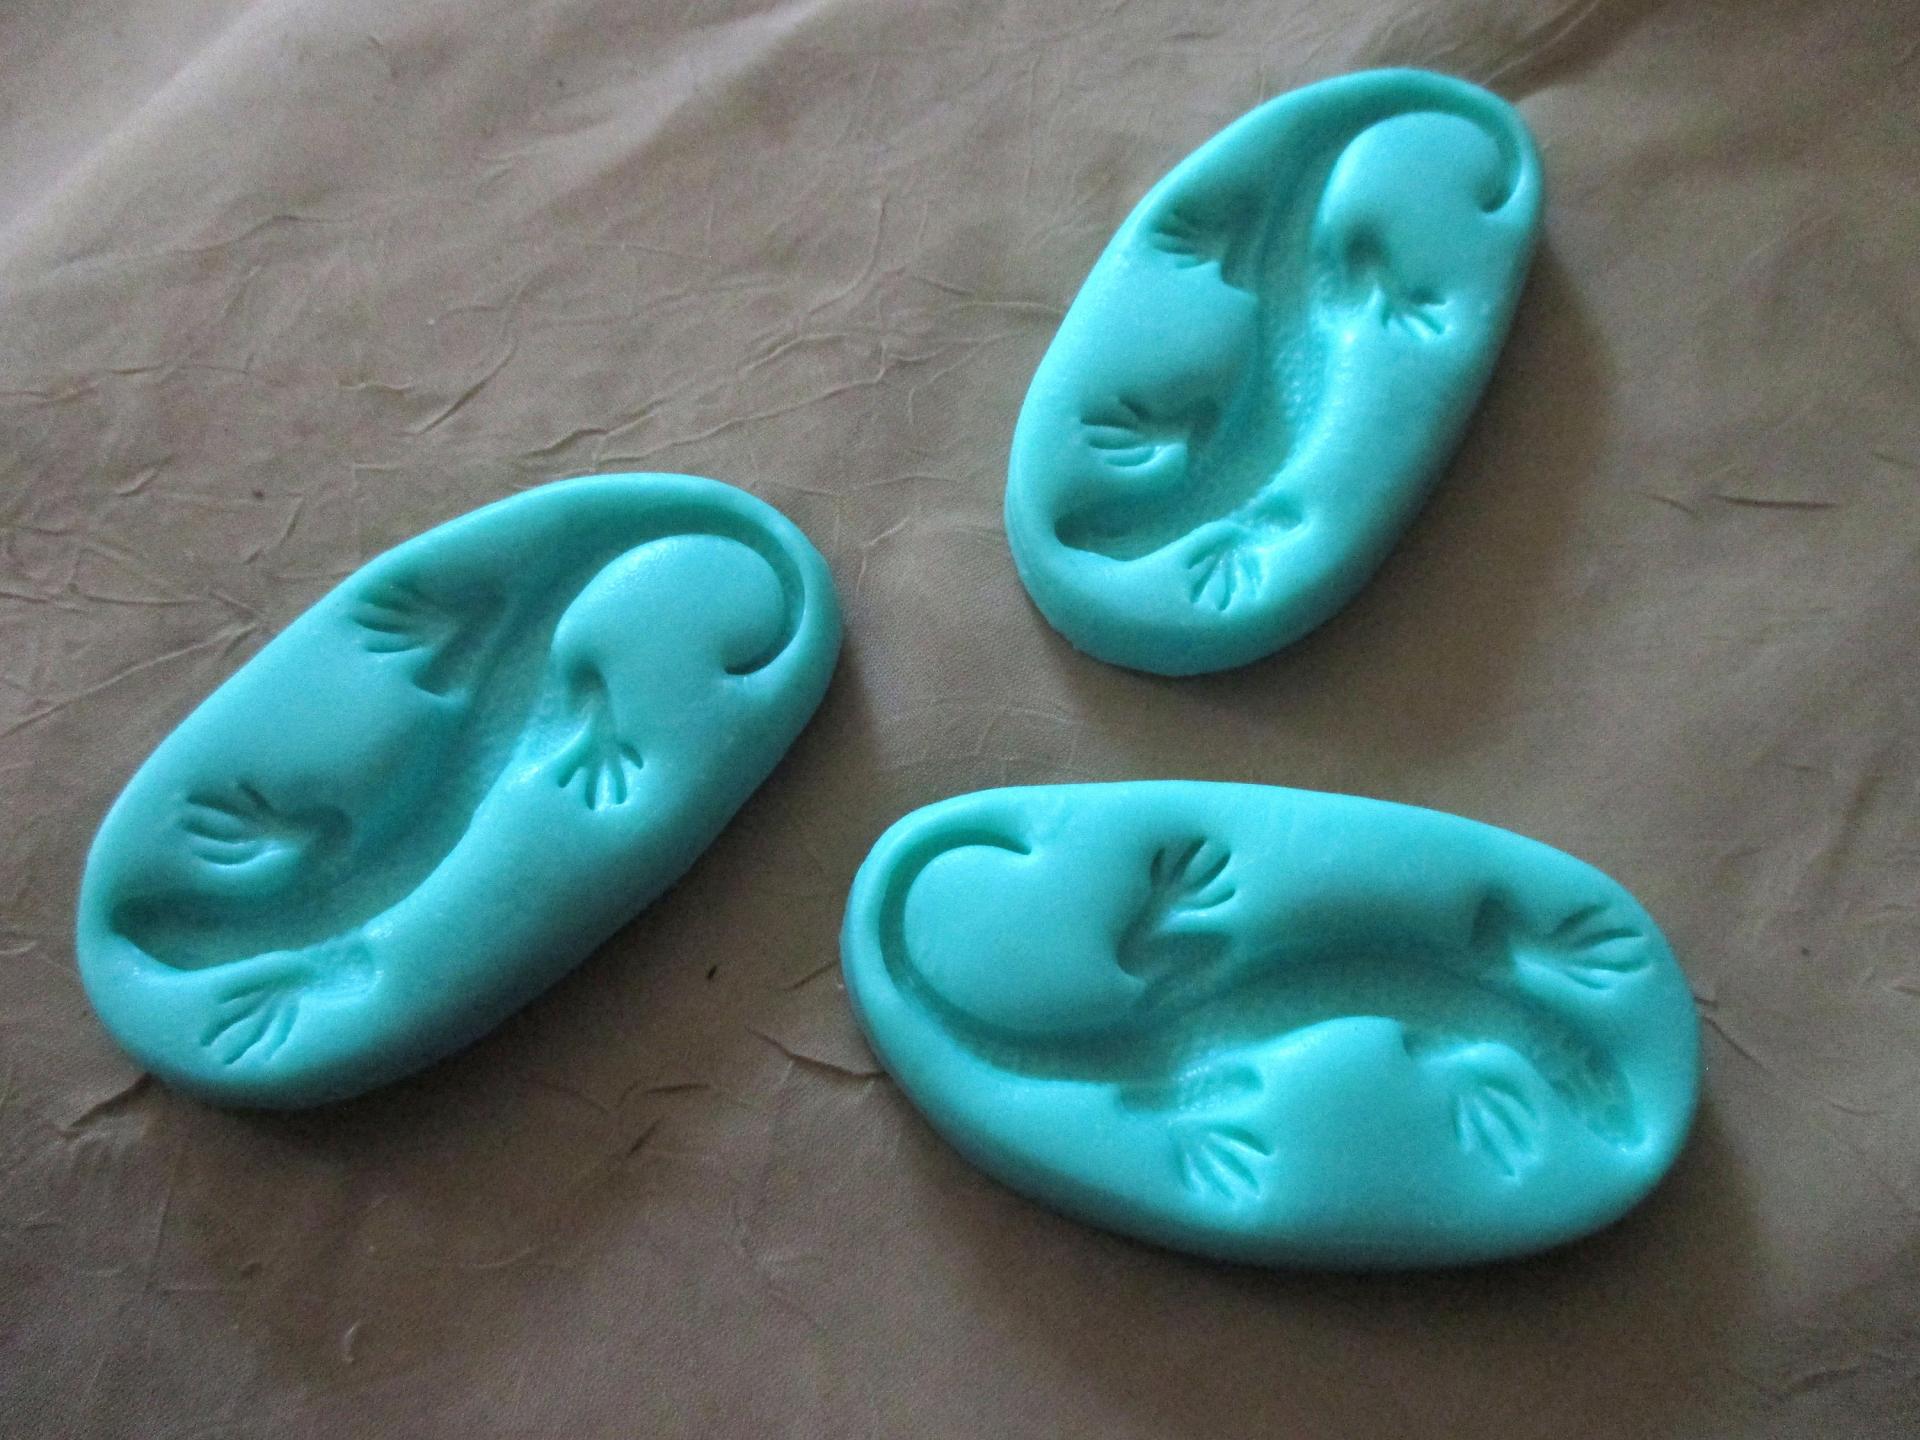 Gecko Mold - Small Lizard - for Resin, Clay, Casting and Baking, or for Soap or wax embeds